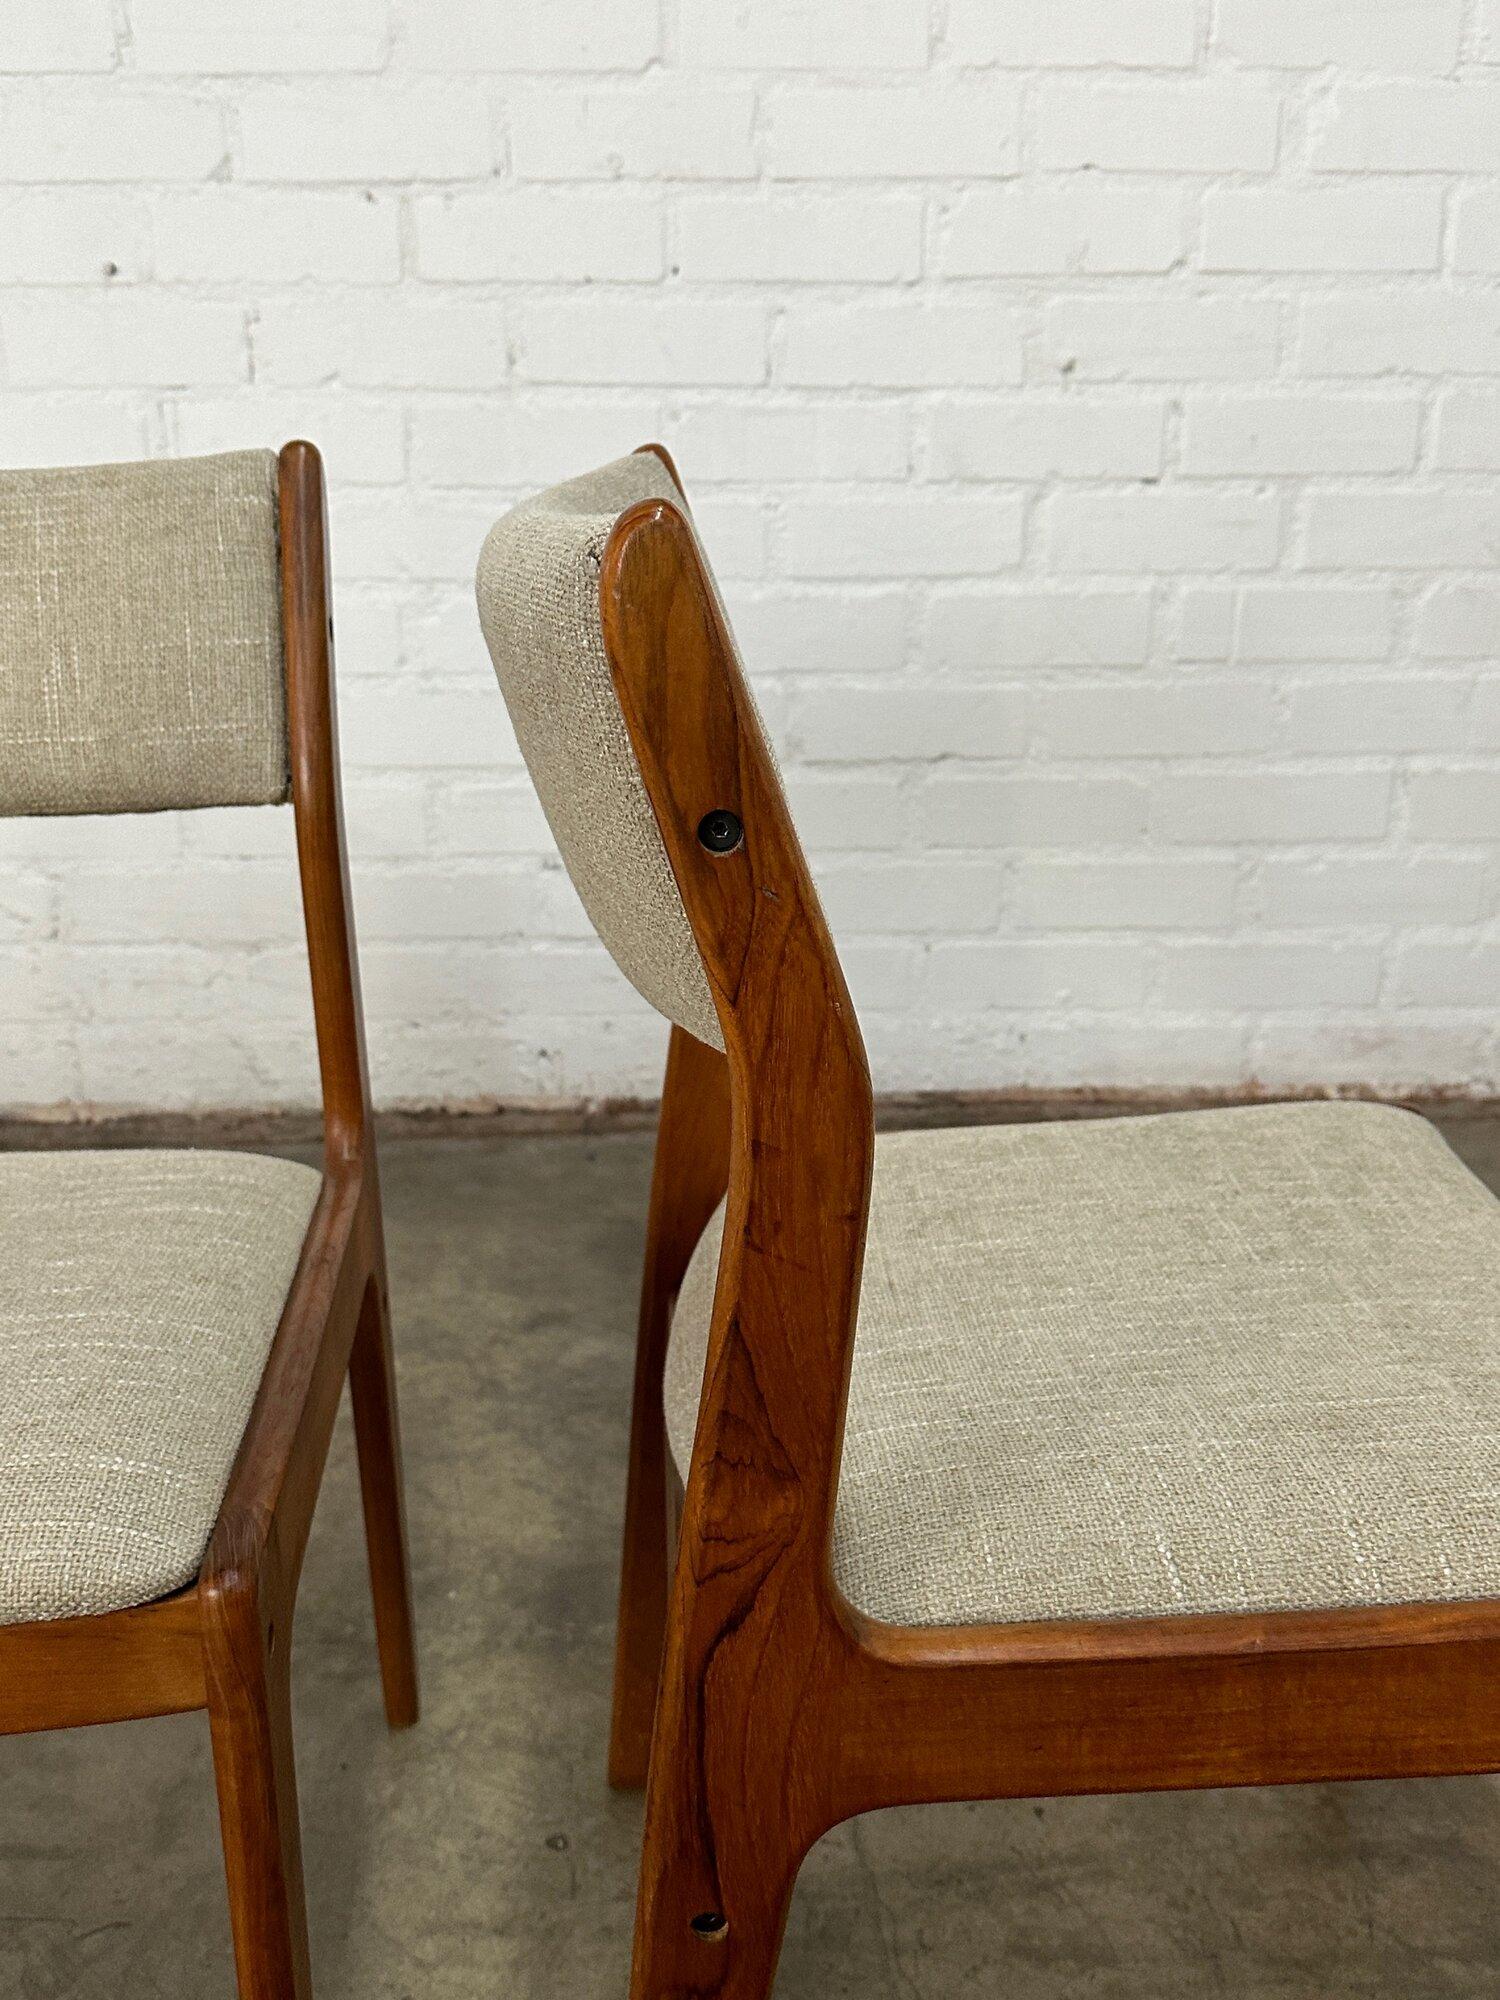 W19.5 D18 H32.5 SW17.5 SD17 SH17

Danish teak diining chairs in good vintage condtion. Chairs have fresh upholstery and solid teak framed have been cleaned and oiled. 

Price is for the set of four.